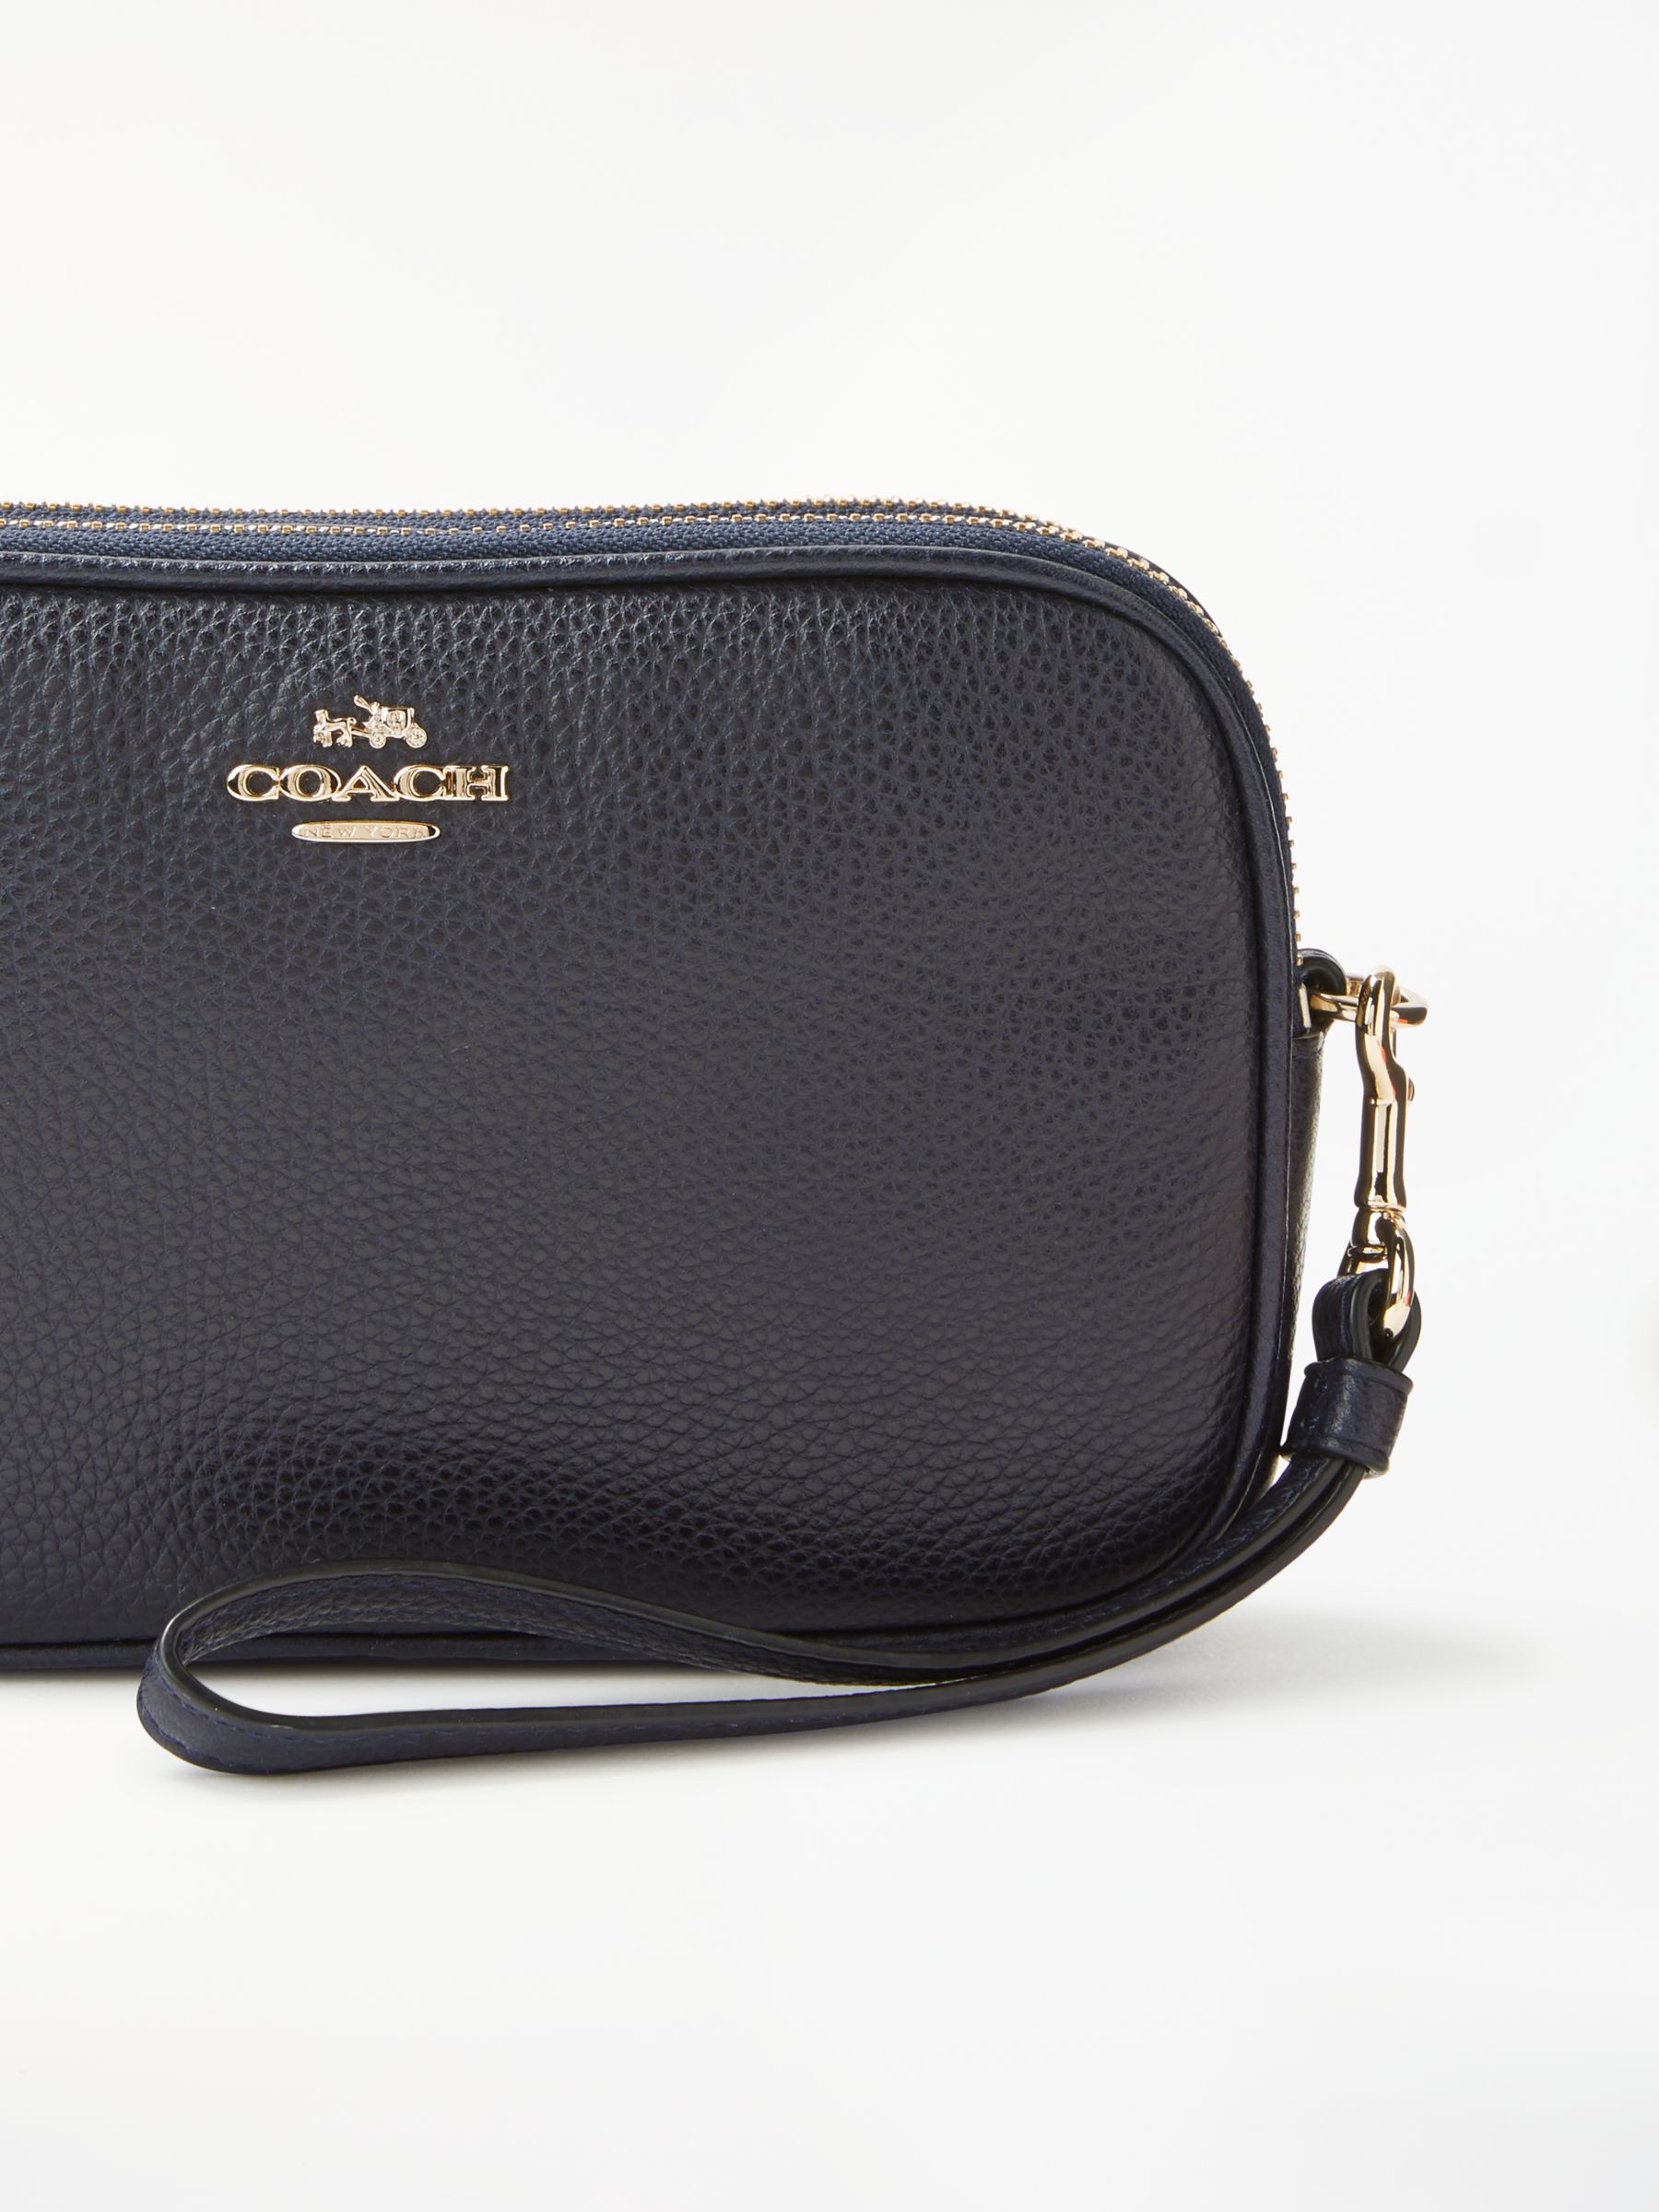 Coach Pebble Leather Cross Body Clutch Bag at John Lewis & Partners